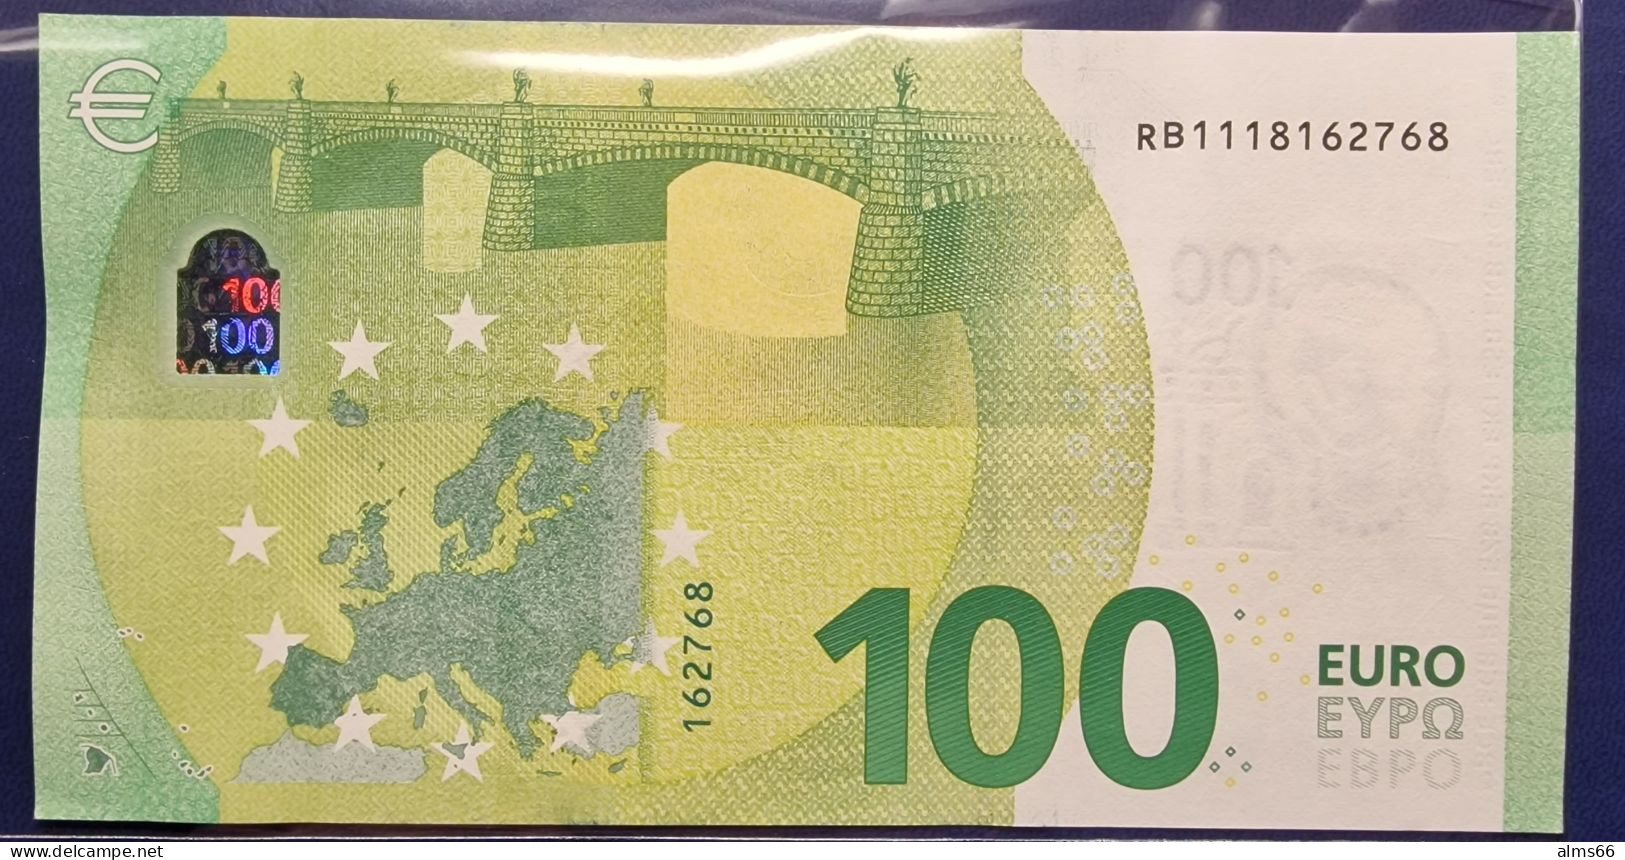 EuronotesK FREE SHIPPING 100 Euro 2019 UNC < RB >< R003 > Germany - Draghi - 100 Euro